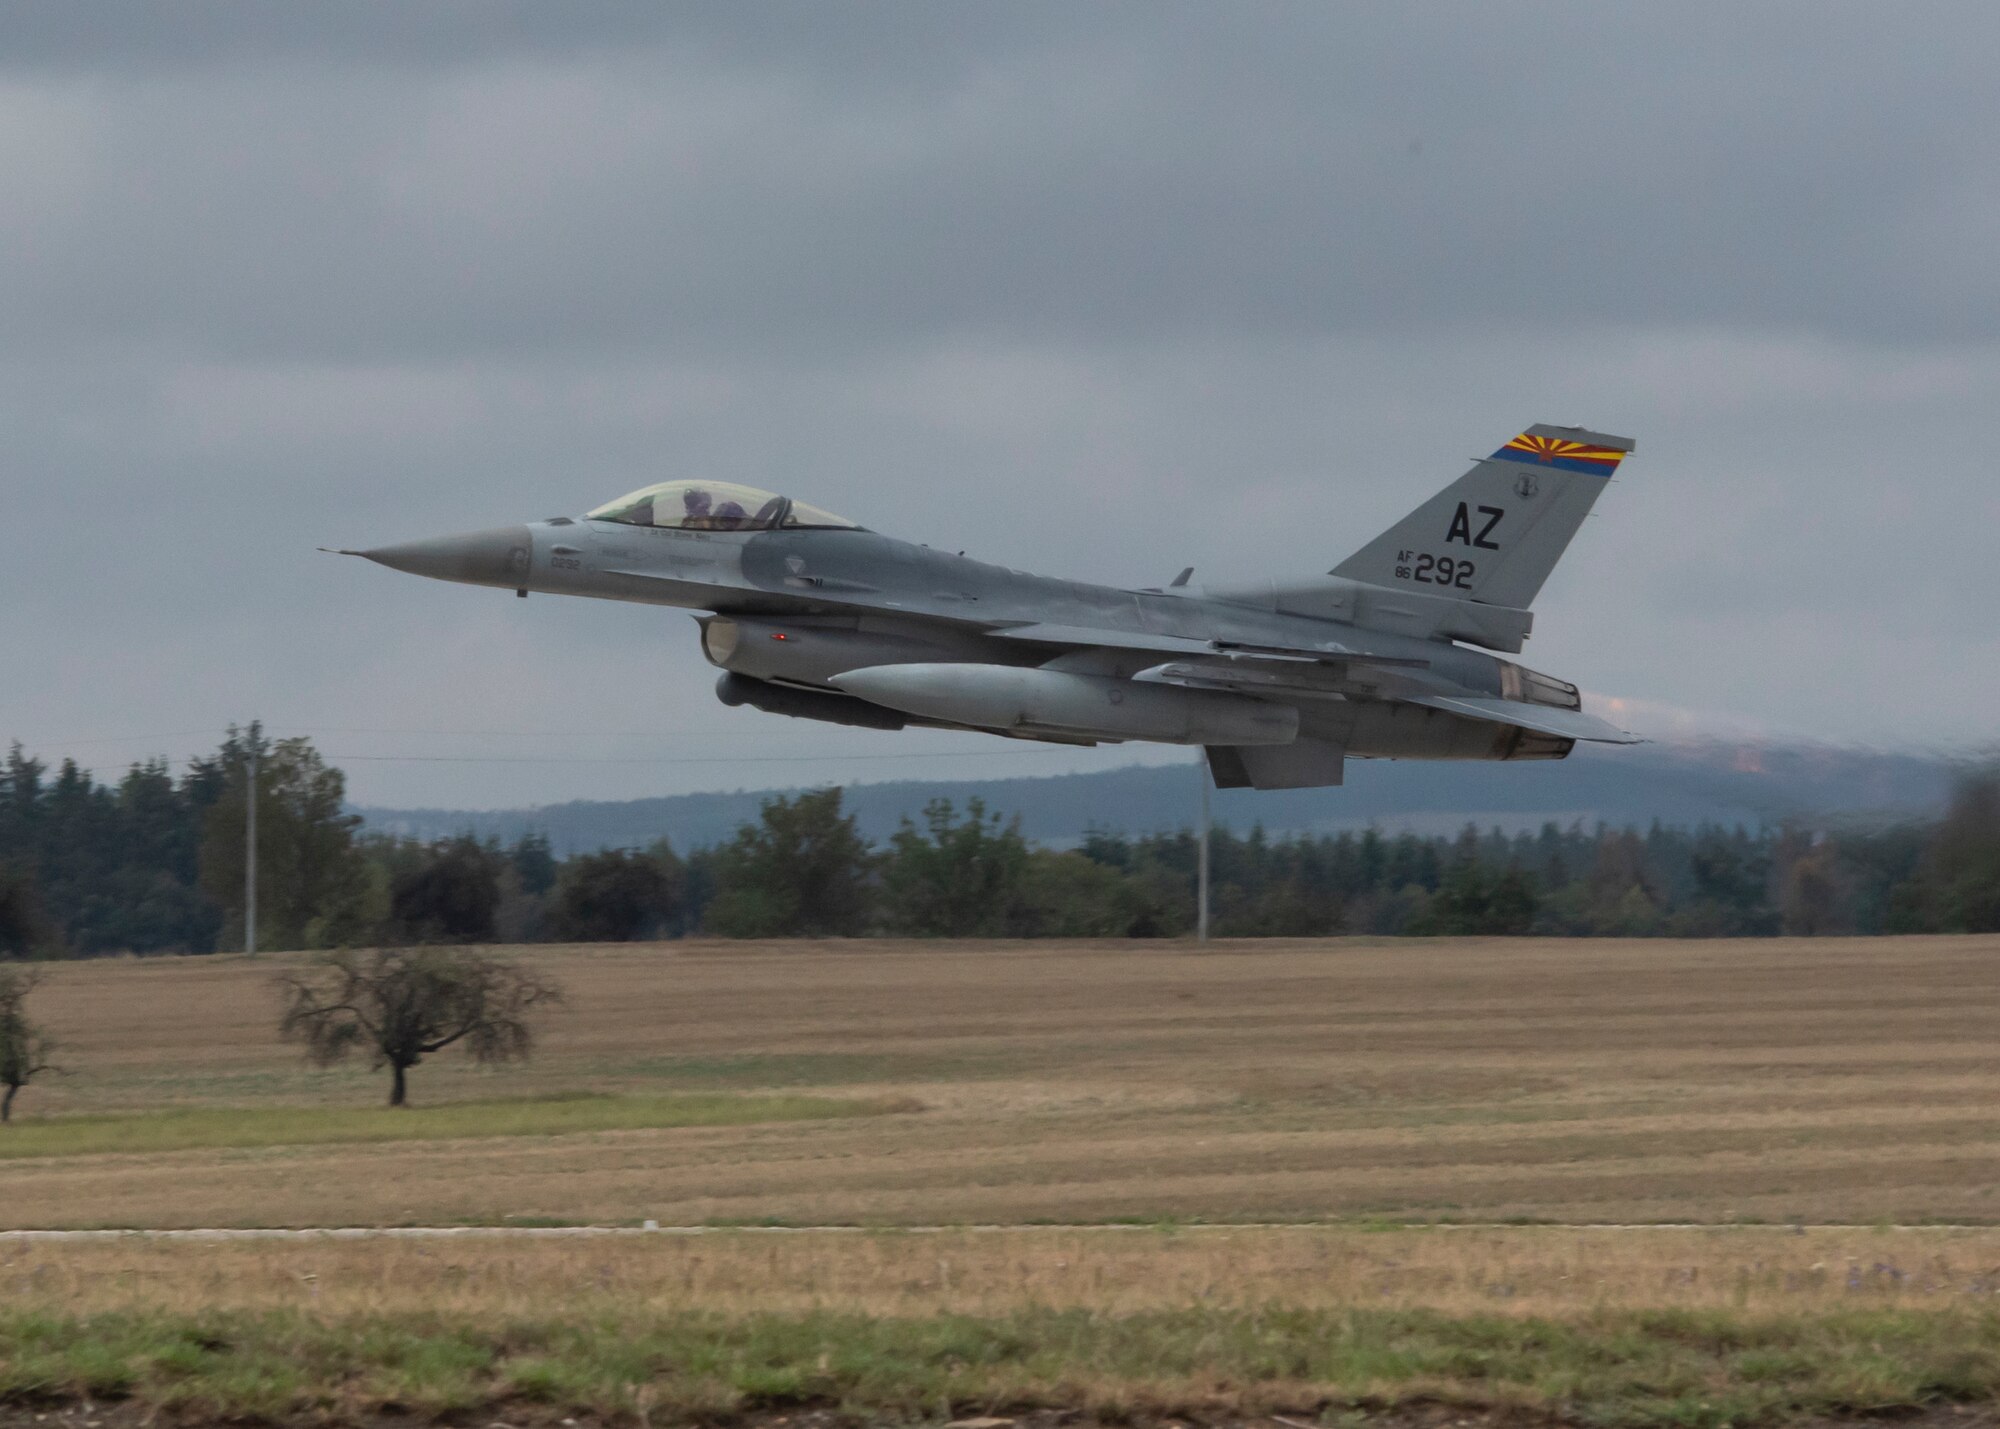 A U.S. Air Force F-16C Fighting Falcon, assigned to the 162nd Wing, Arizona Air National Guard, takes off from Namest Air Base, Czech Republic, for the start of Exercise Ample Strike 2018. Ample Strike is a Czech Republic led, multi-national live exercise that offers advanced air and land integration training to Joint Terminal Attack Controllers (JTACs) and Close Air Support (CAS) aircrews. The exercise highlights the United States and our NATO allies and partner nations commitment to defending the territorial integrity of Europe. (U.S. Air National Guard photo by Staff Sgt. George Keck)